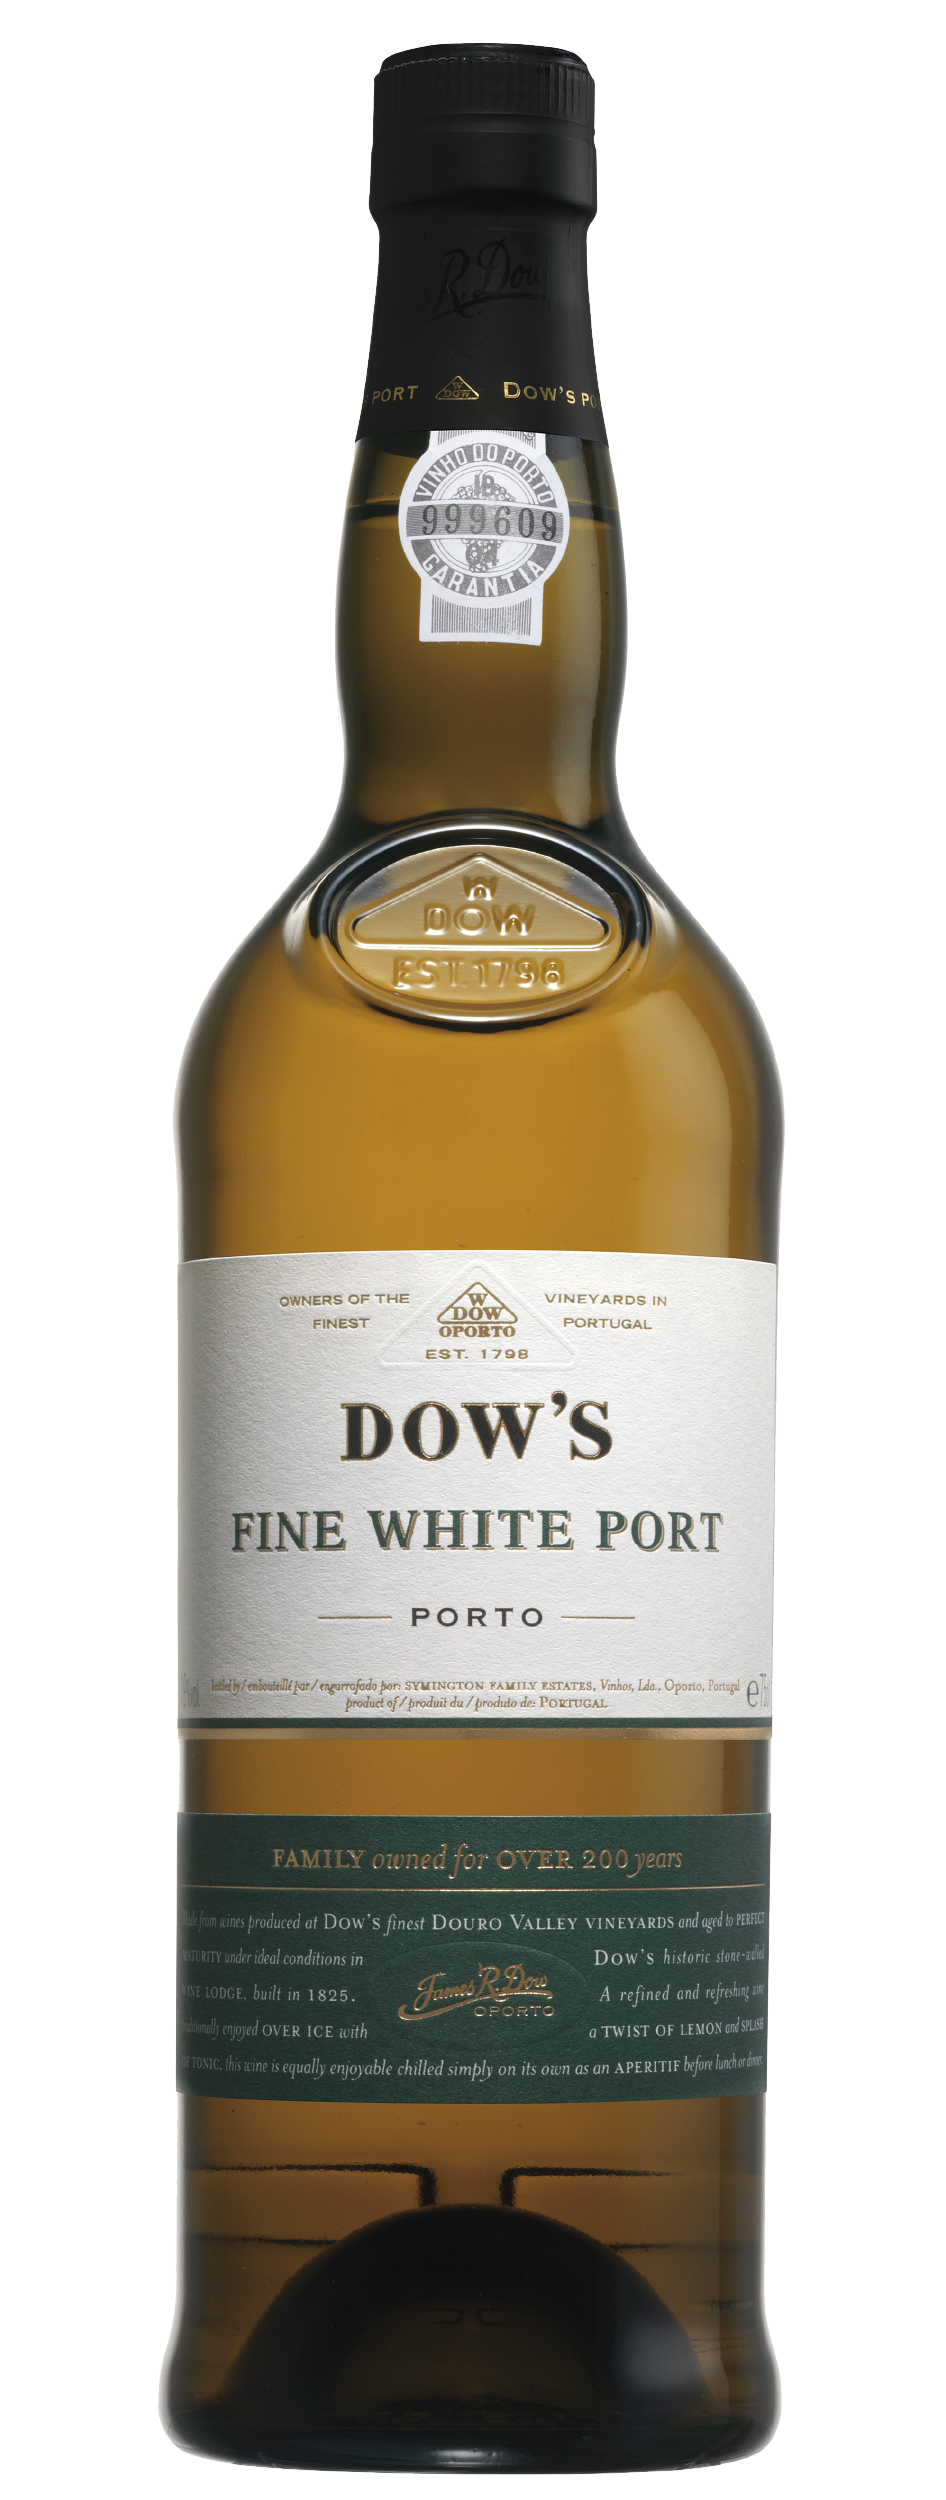 Product Image for DOW'S FINE WHITE PORT - Old Label